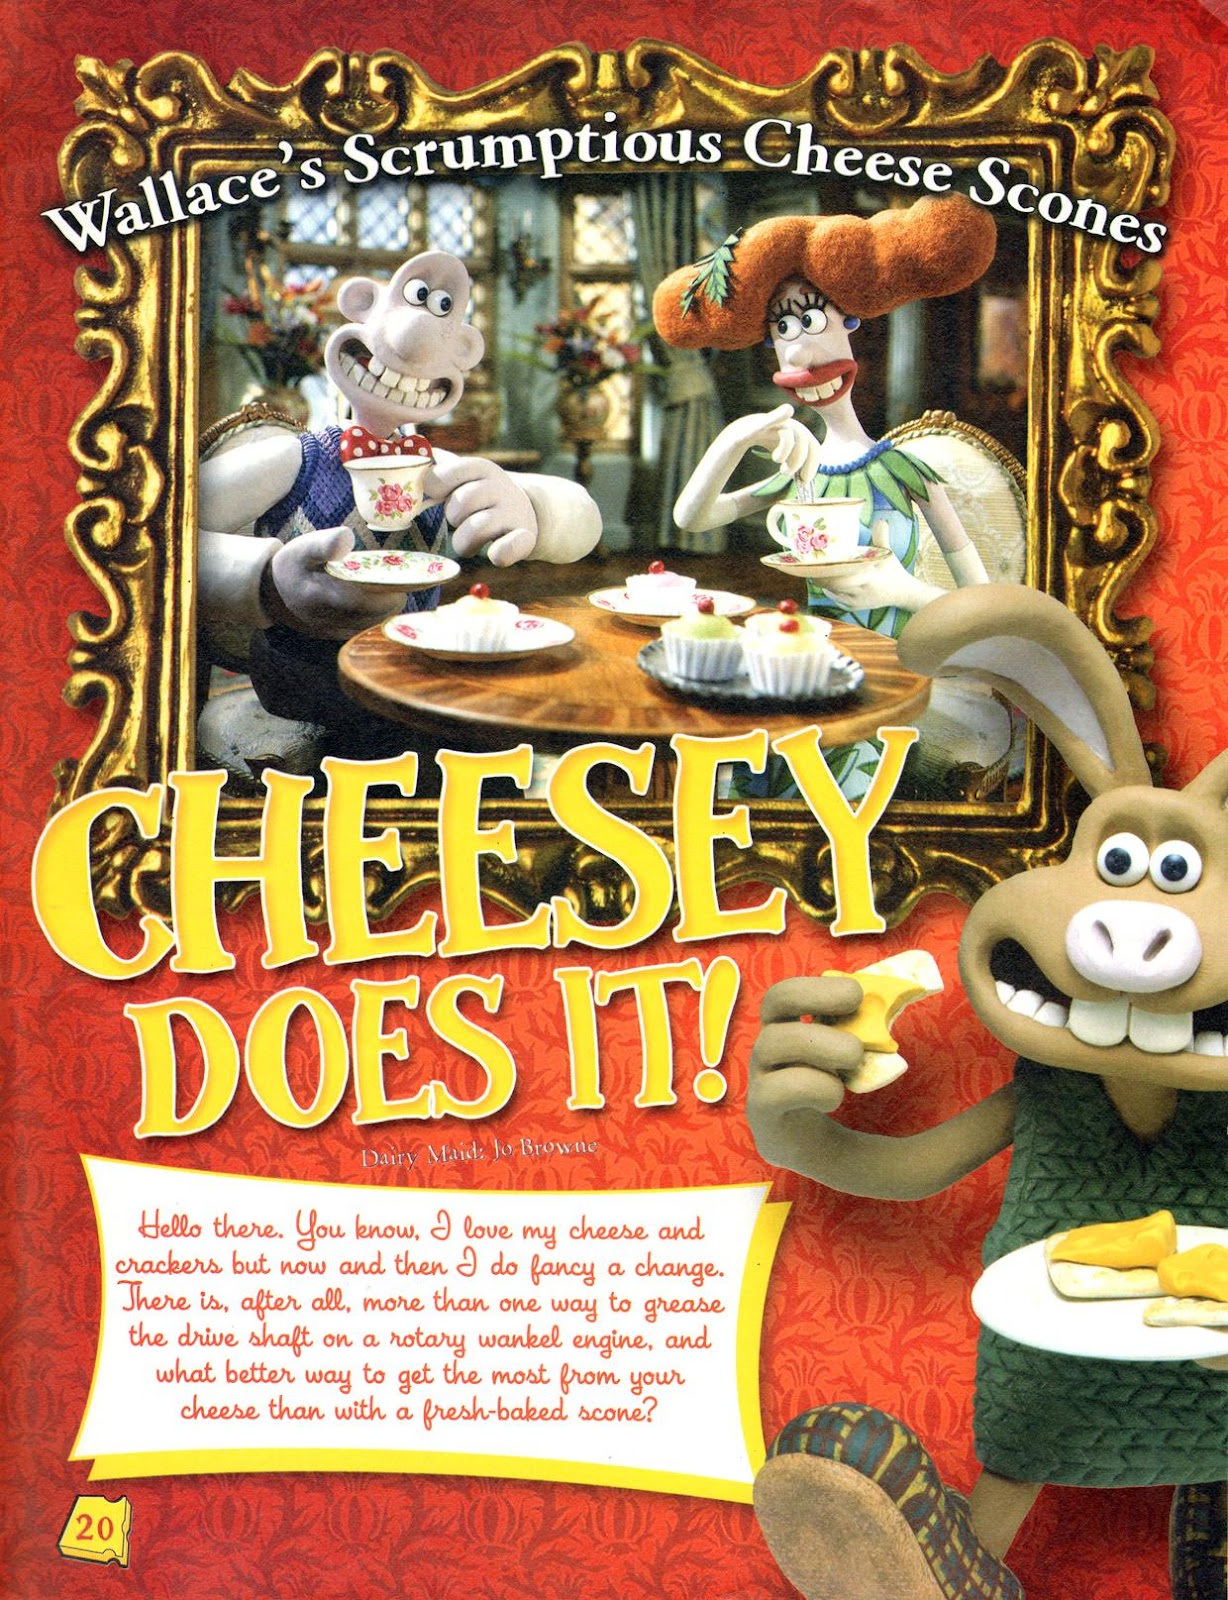 Wallace & Gromit Comic issue 10 - Page 20